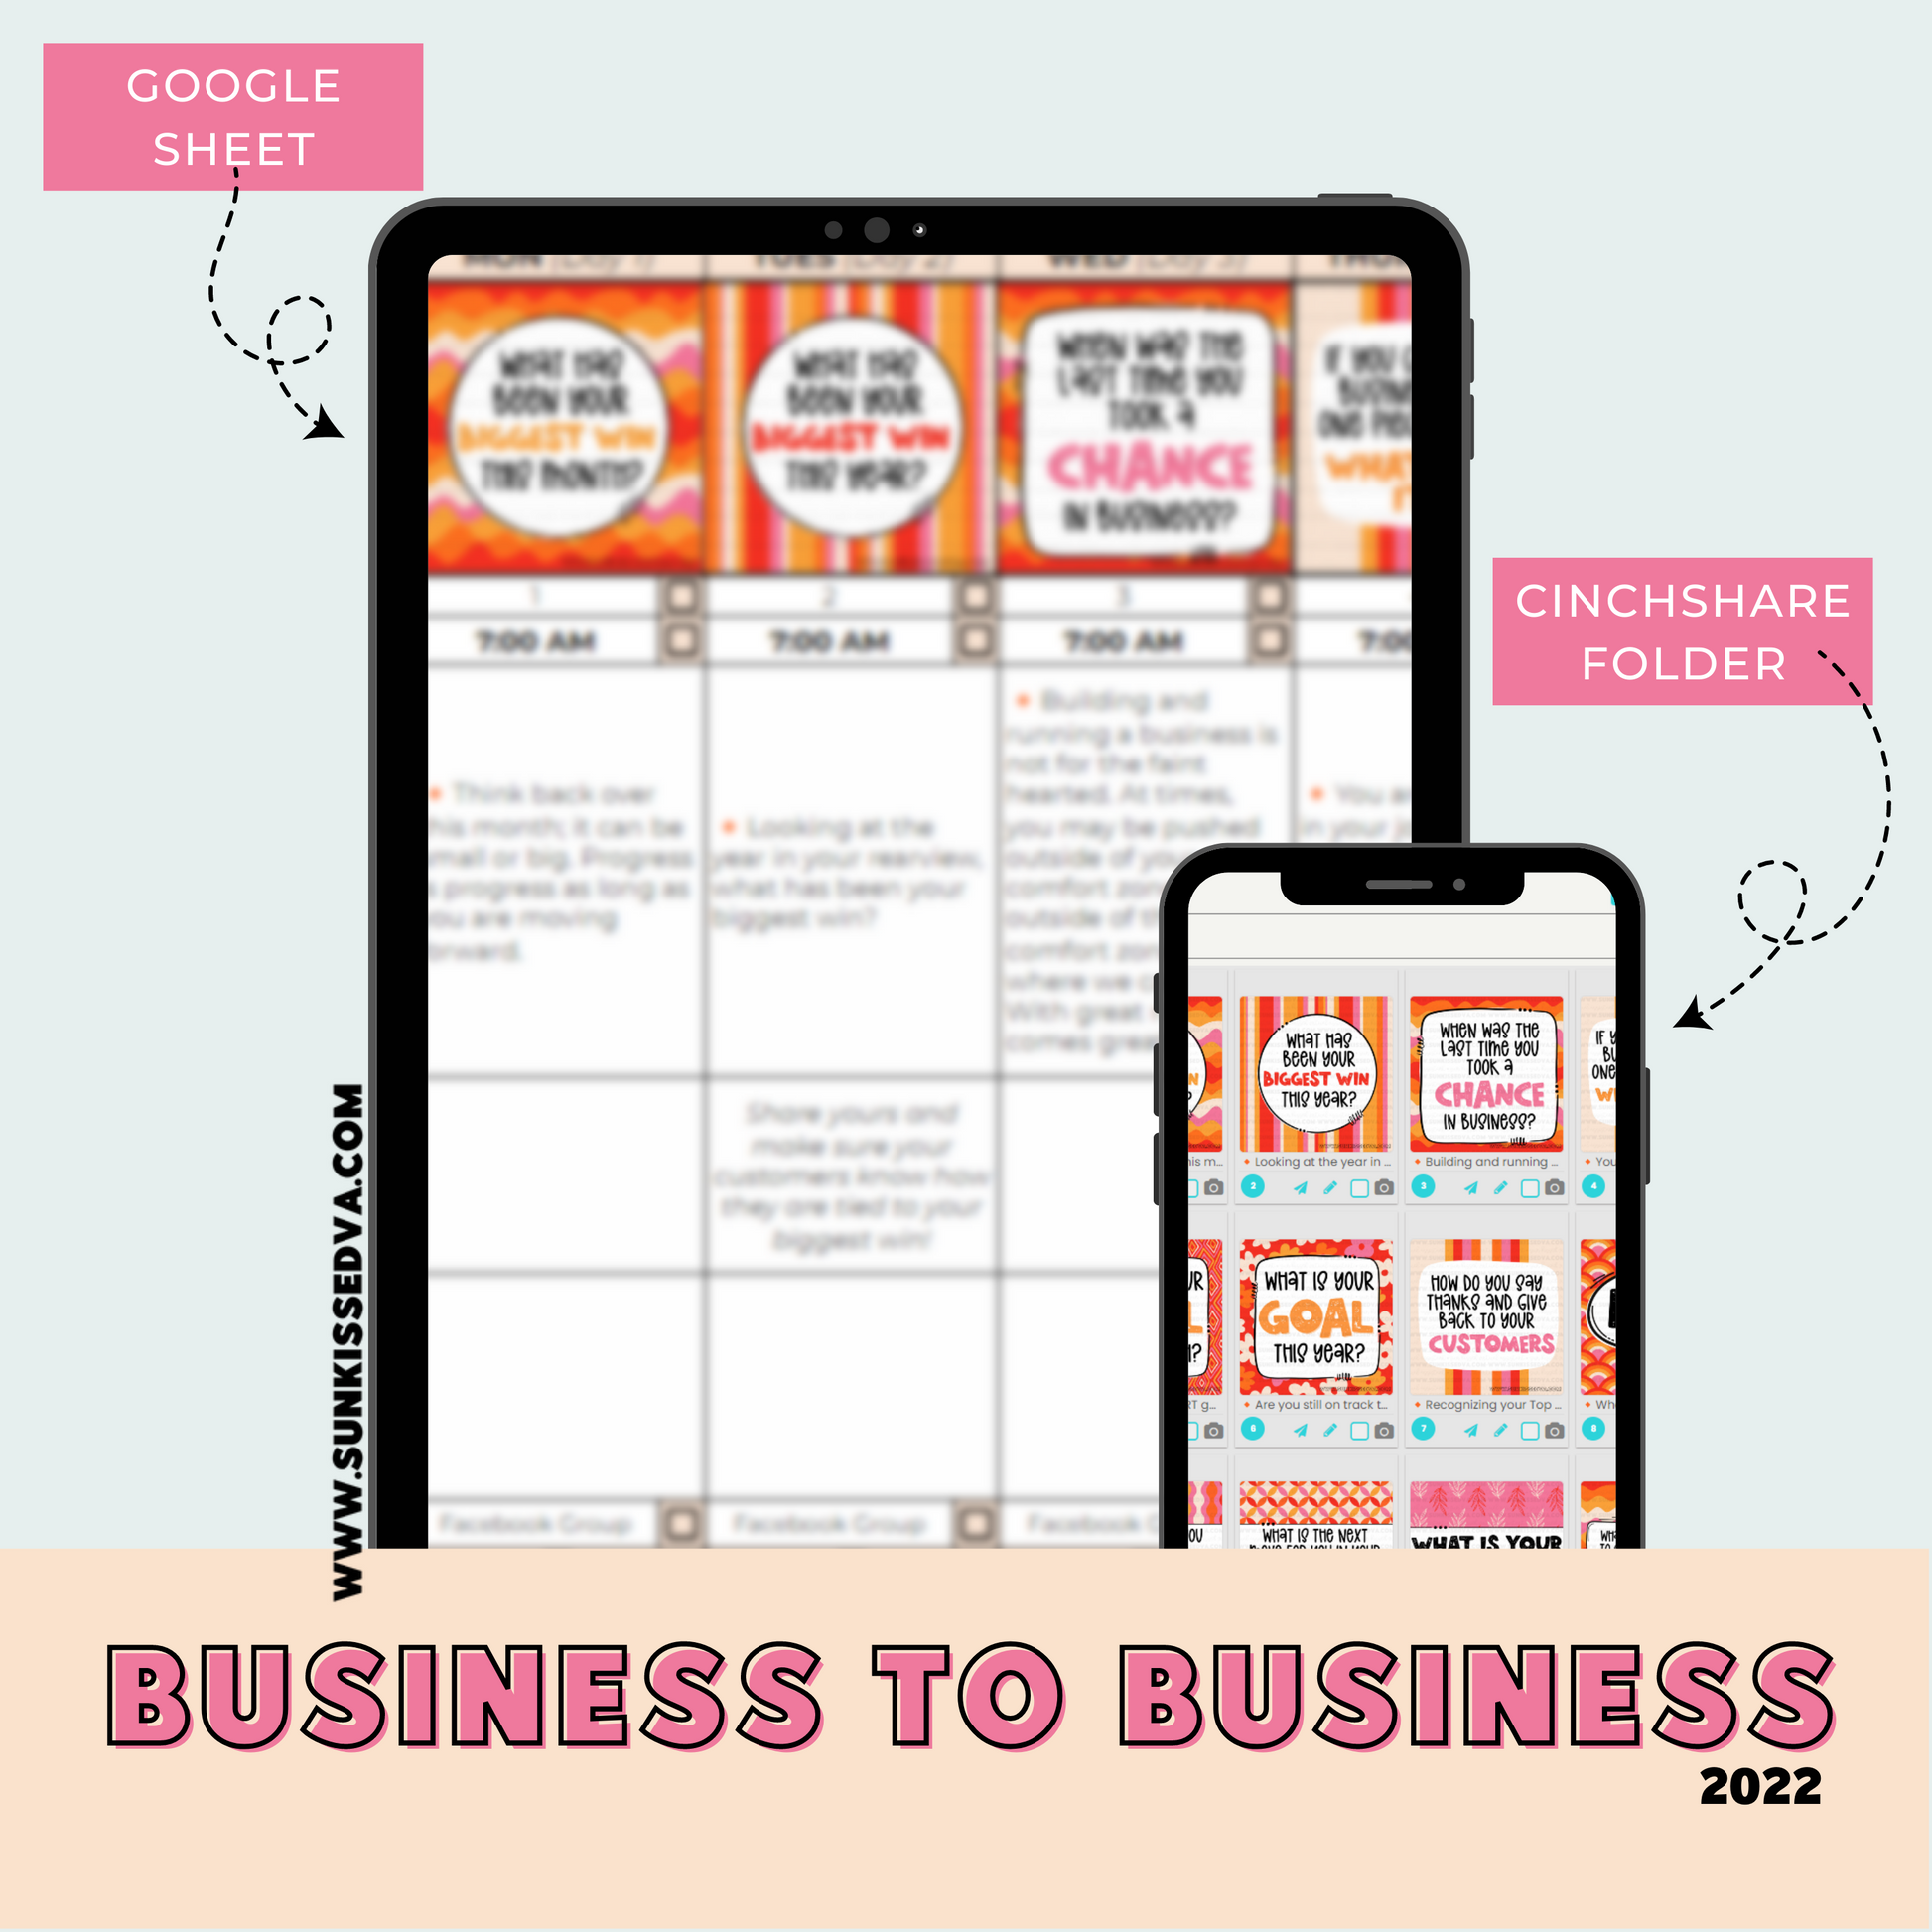 B2B Content Calendar to connect with your customers | Sun Kissed Virtual Assistant